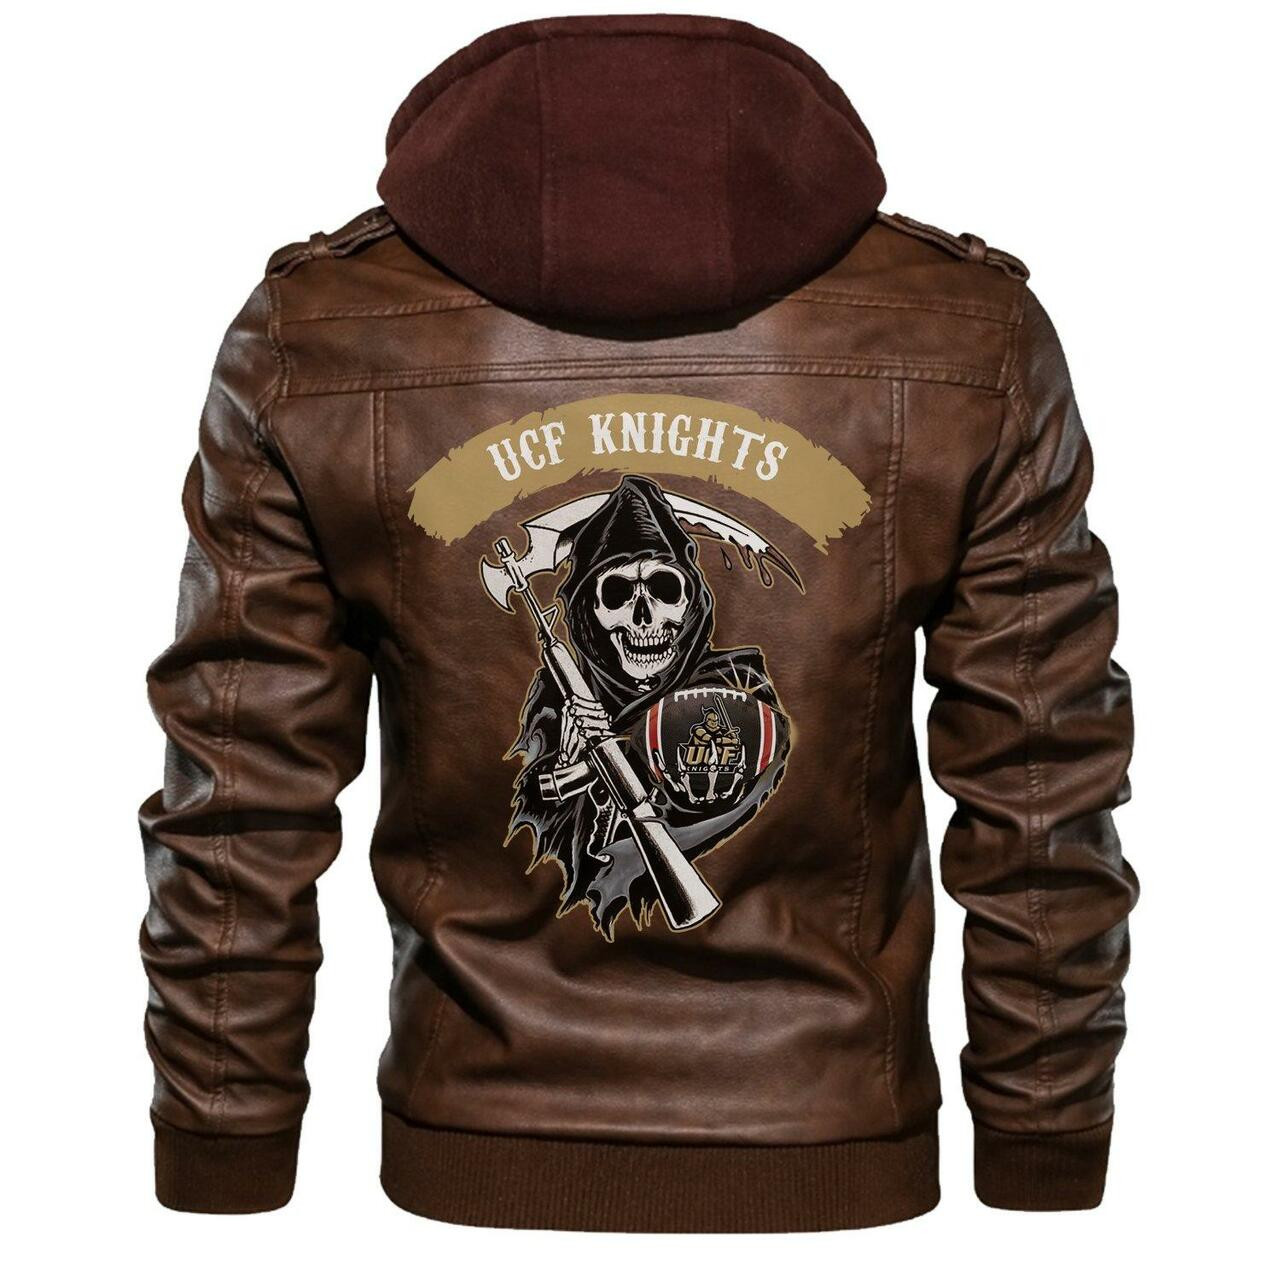 Check out and find the right leather jacket below 259